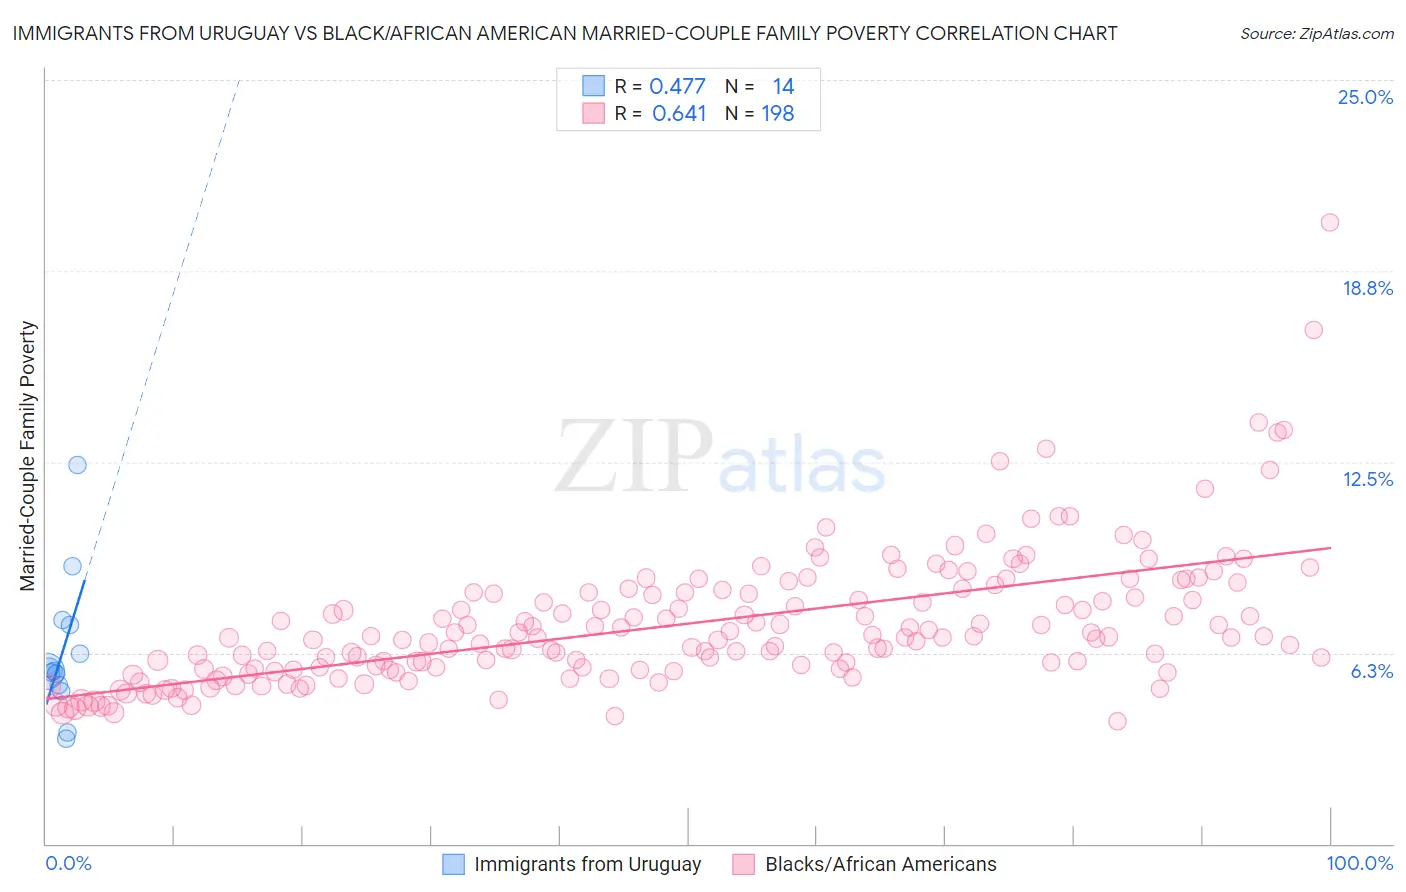 Immigrants from Uruguay vs Black/African American Married-Couple Family Poverty